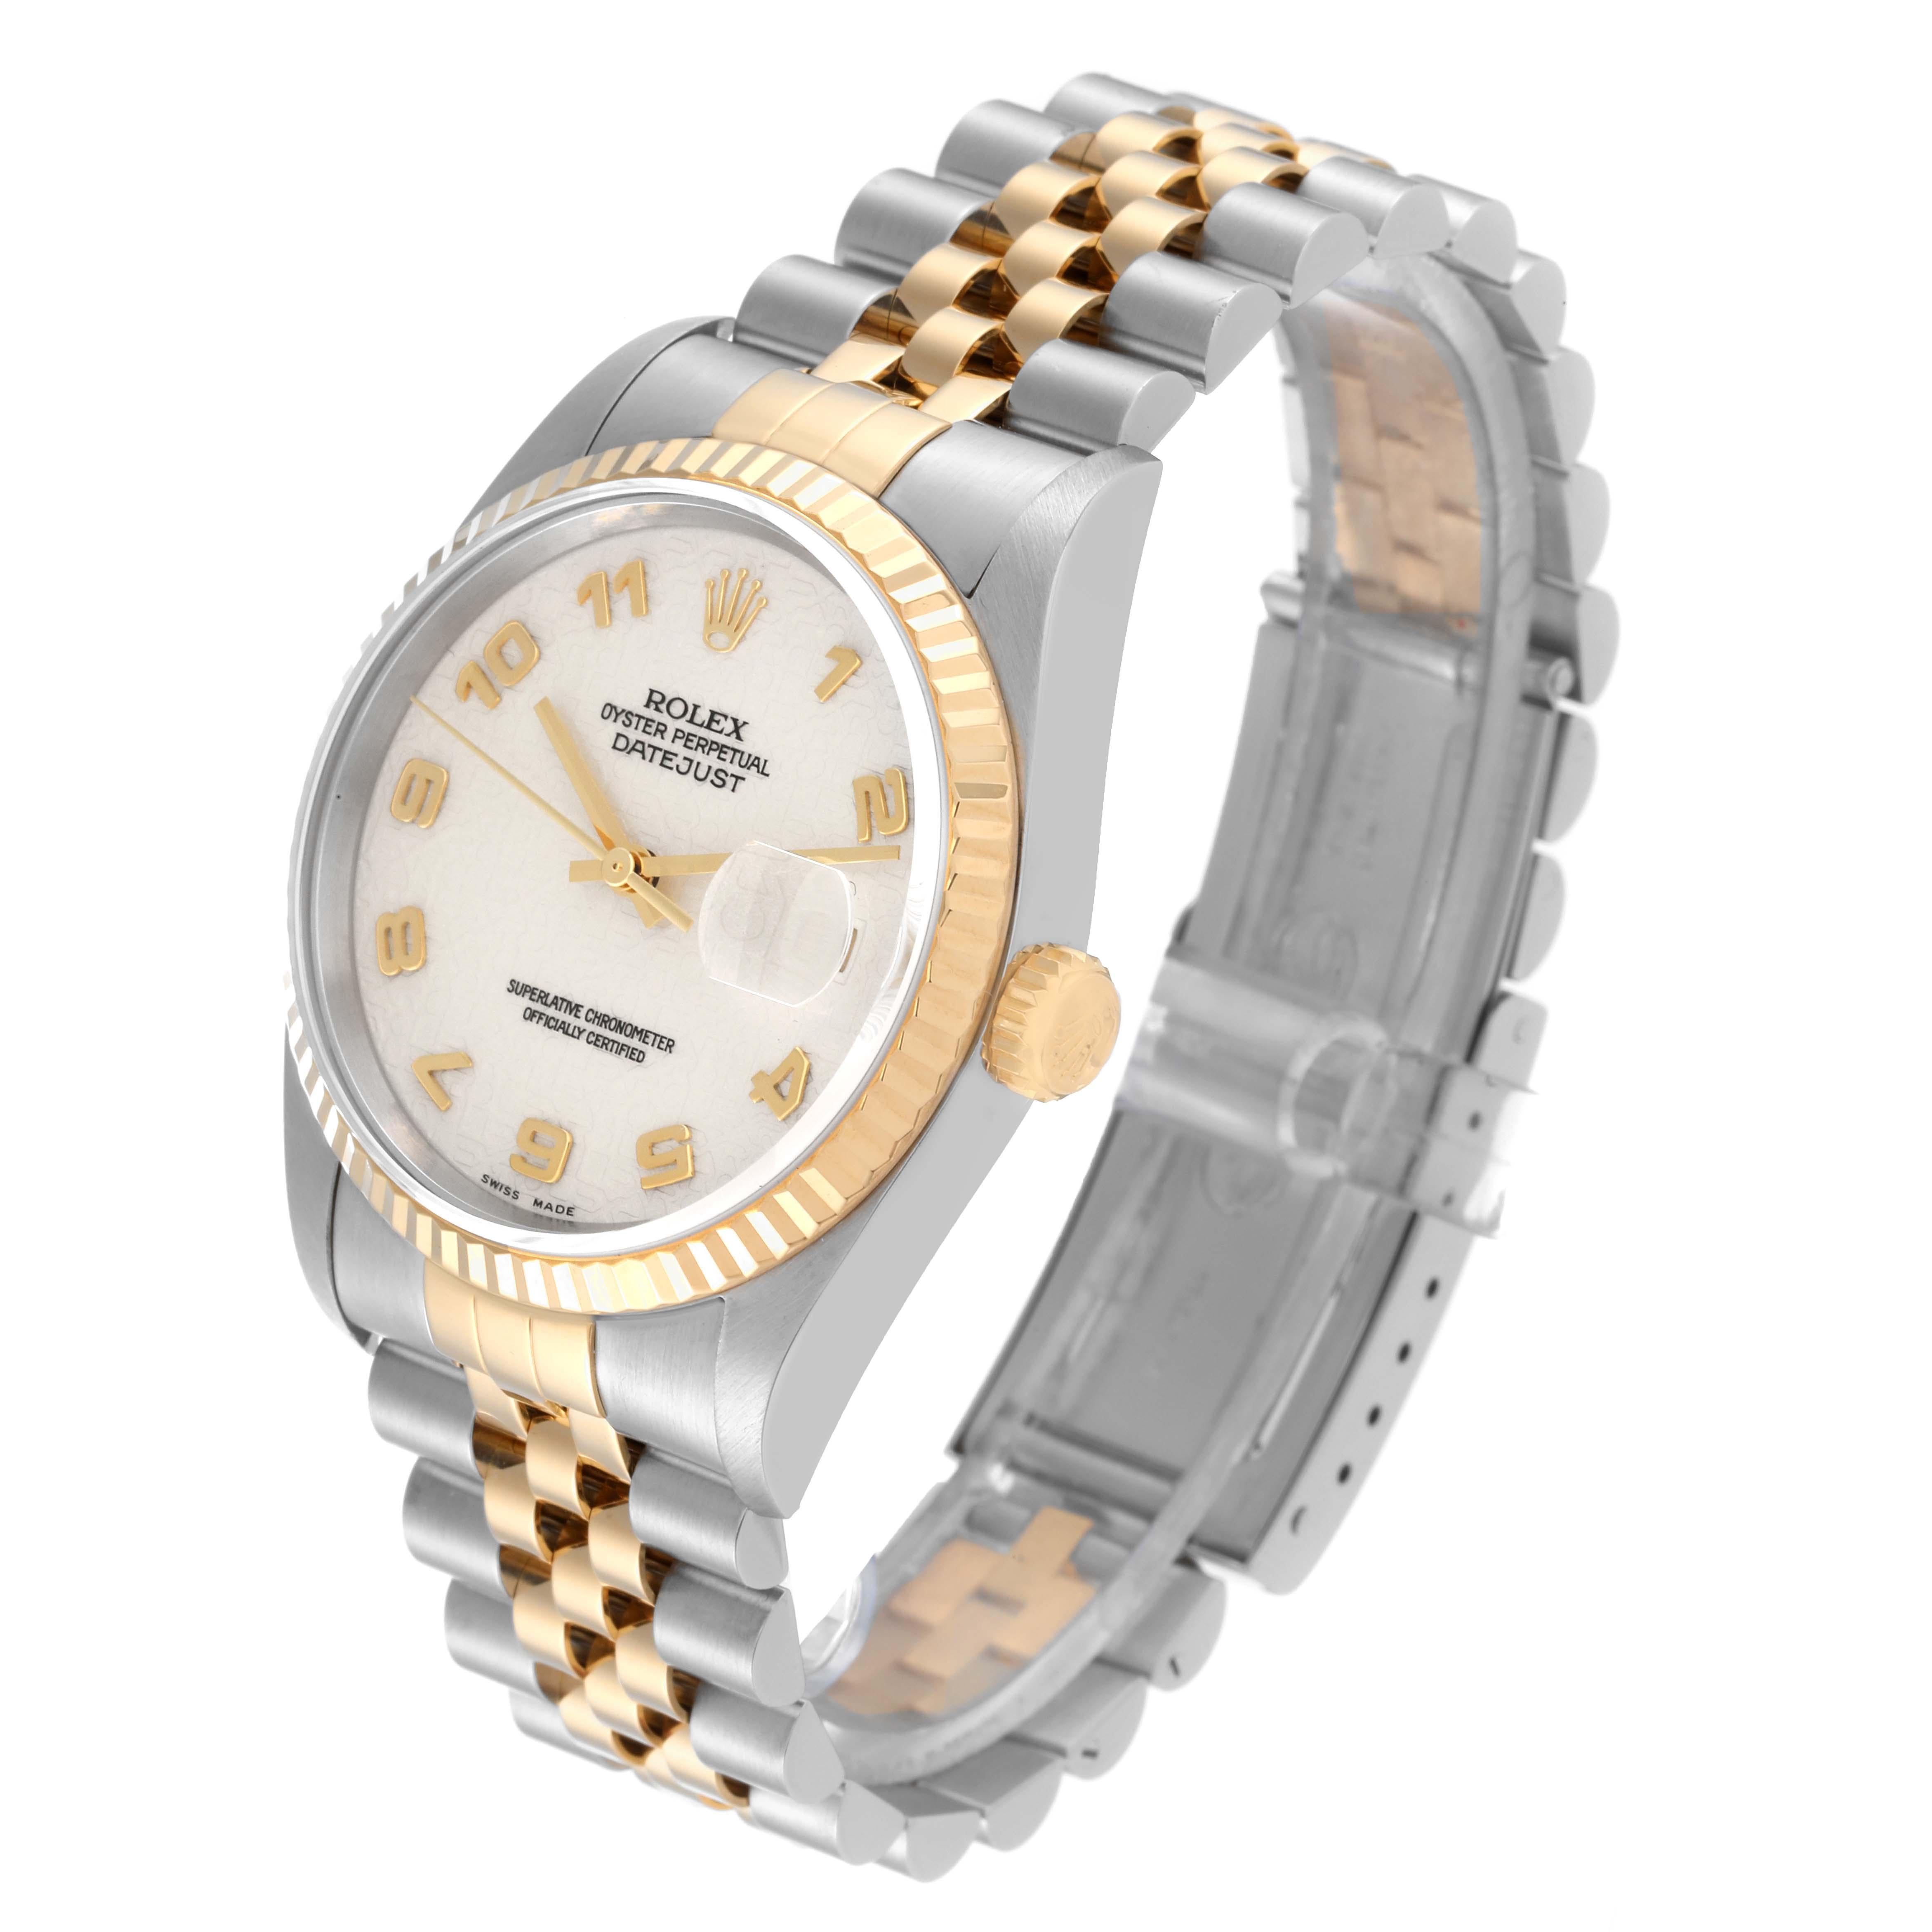 Rolex Datejust Steel Yellow Gold Ivory Anniversary Dial Mens Watch 16233 In Excellent Condition For Sale In Atlanta, GA